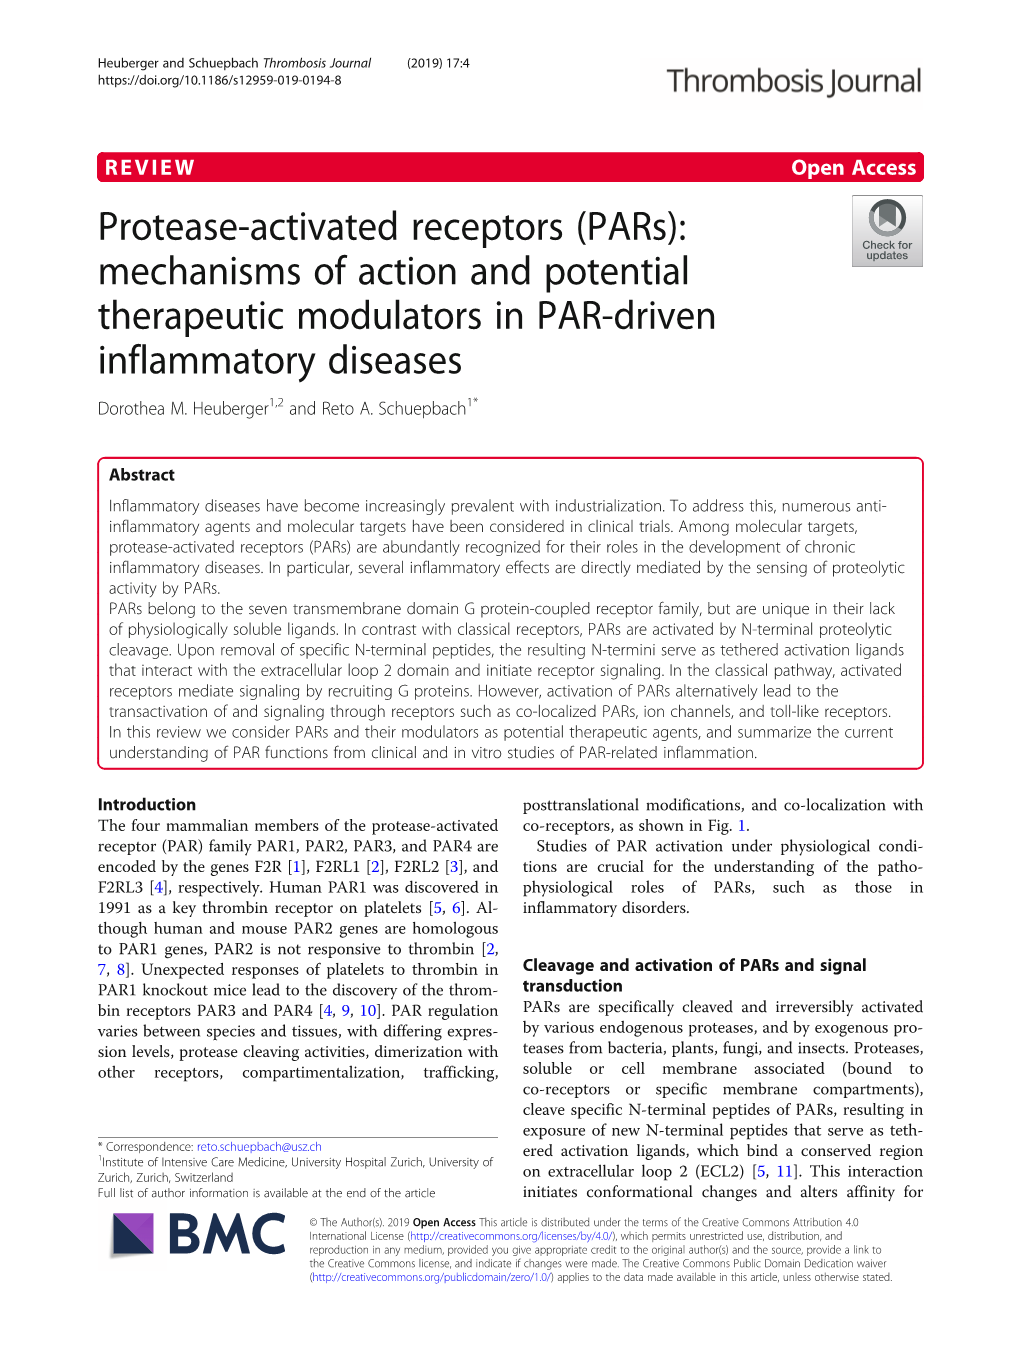 Protease-Activated Receptors (Pars): Mechanisms of Action and Potential Therapeutic Modulators in PAR-Driven Inflammatory Diseases Dorothea M